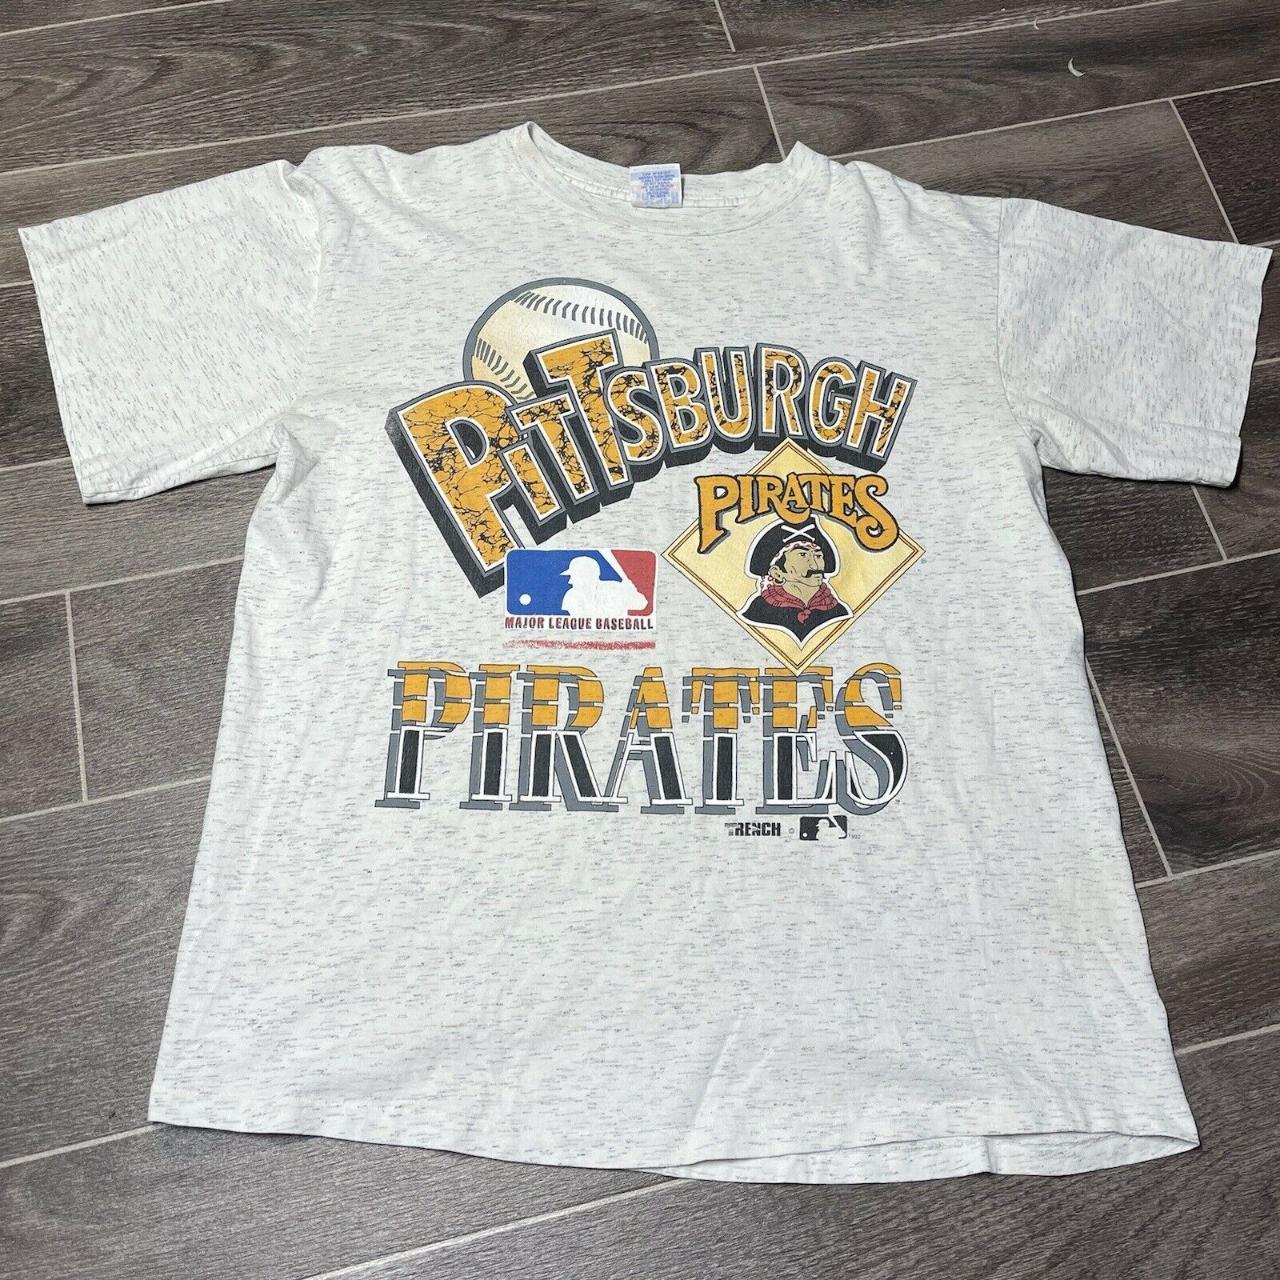 Pittsburgh Pirates Homestead Grays S Small Lot 5 shirts Capps Leftfield  Loonies